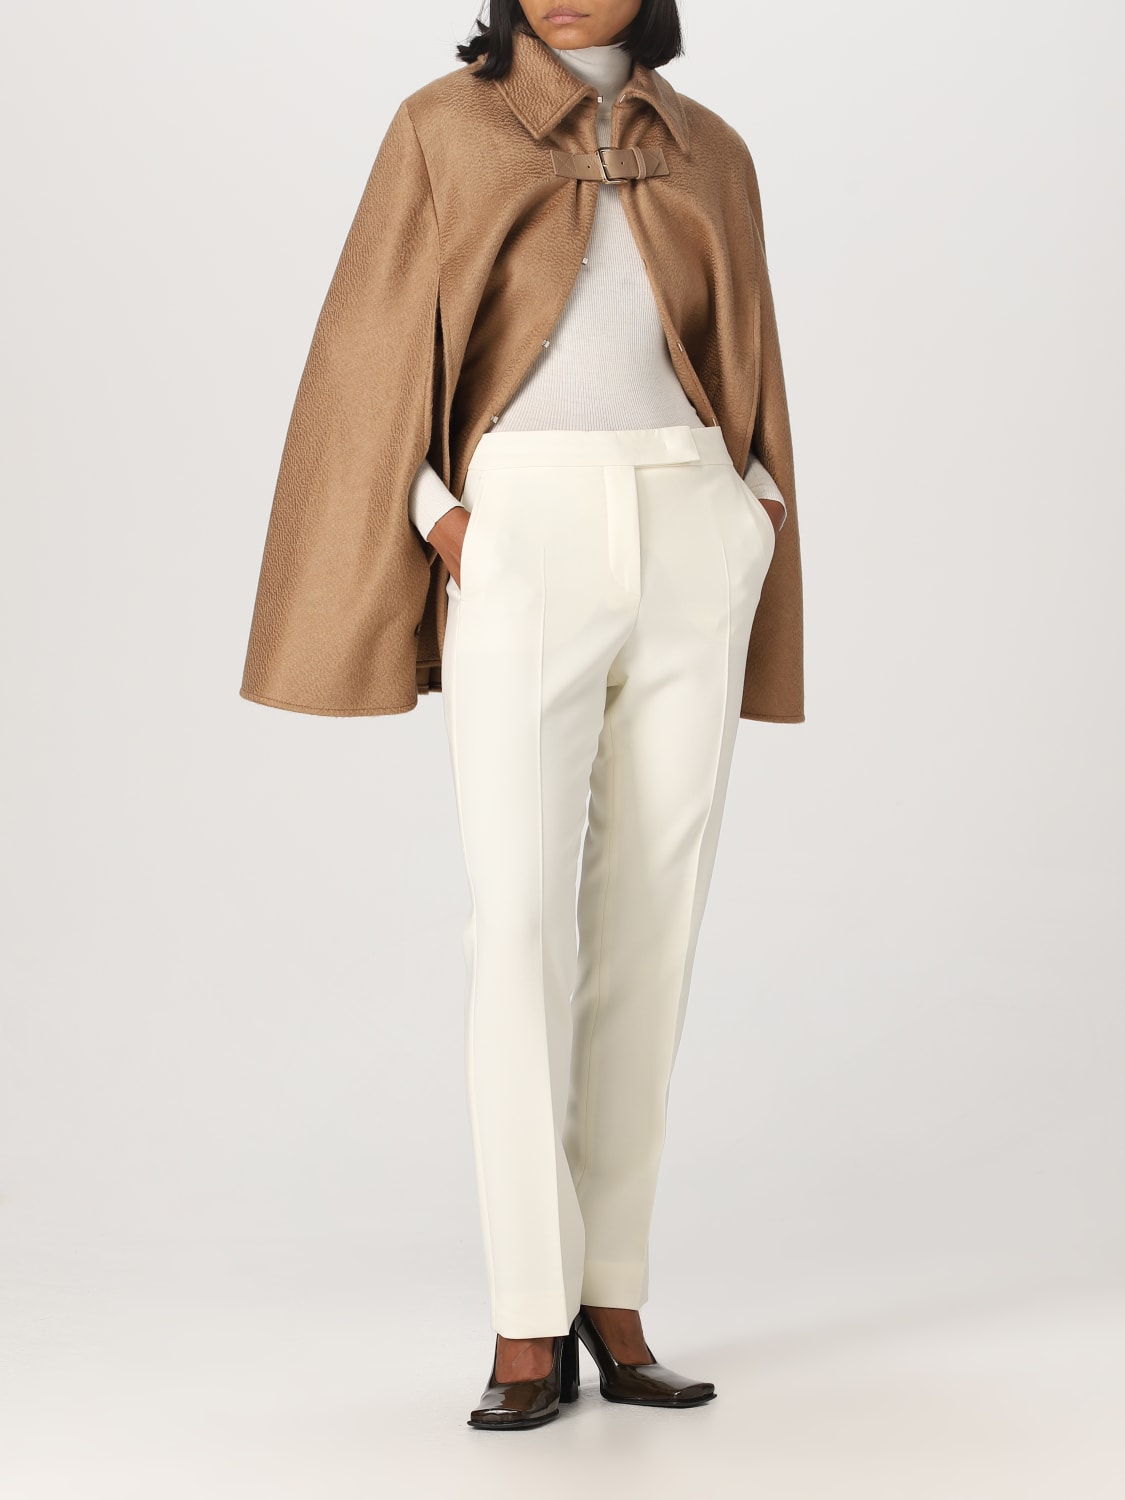 MAX MARA: cape in wool and cashmere with slits - Camel | Max Mara cape ...